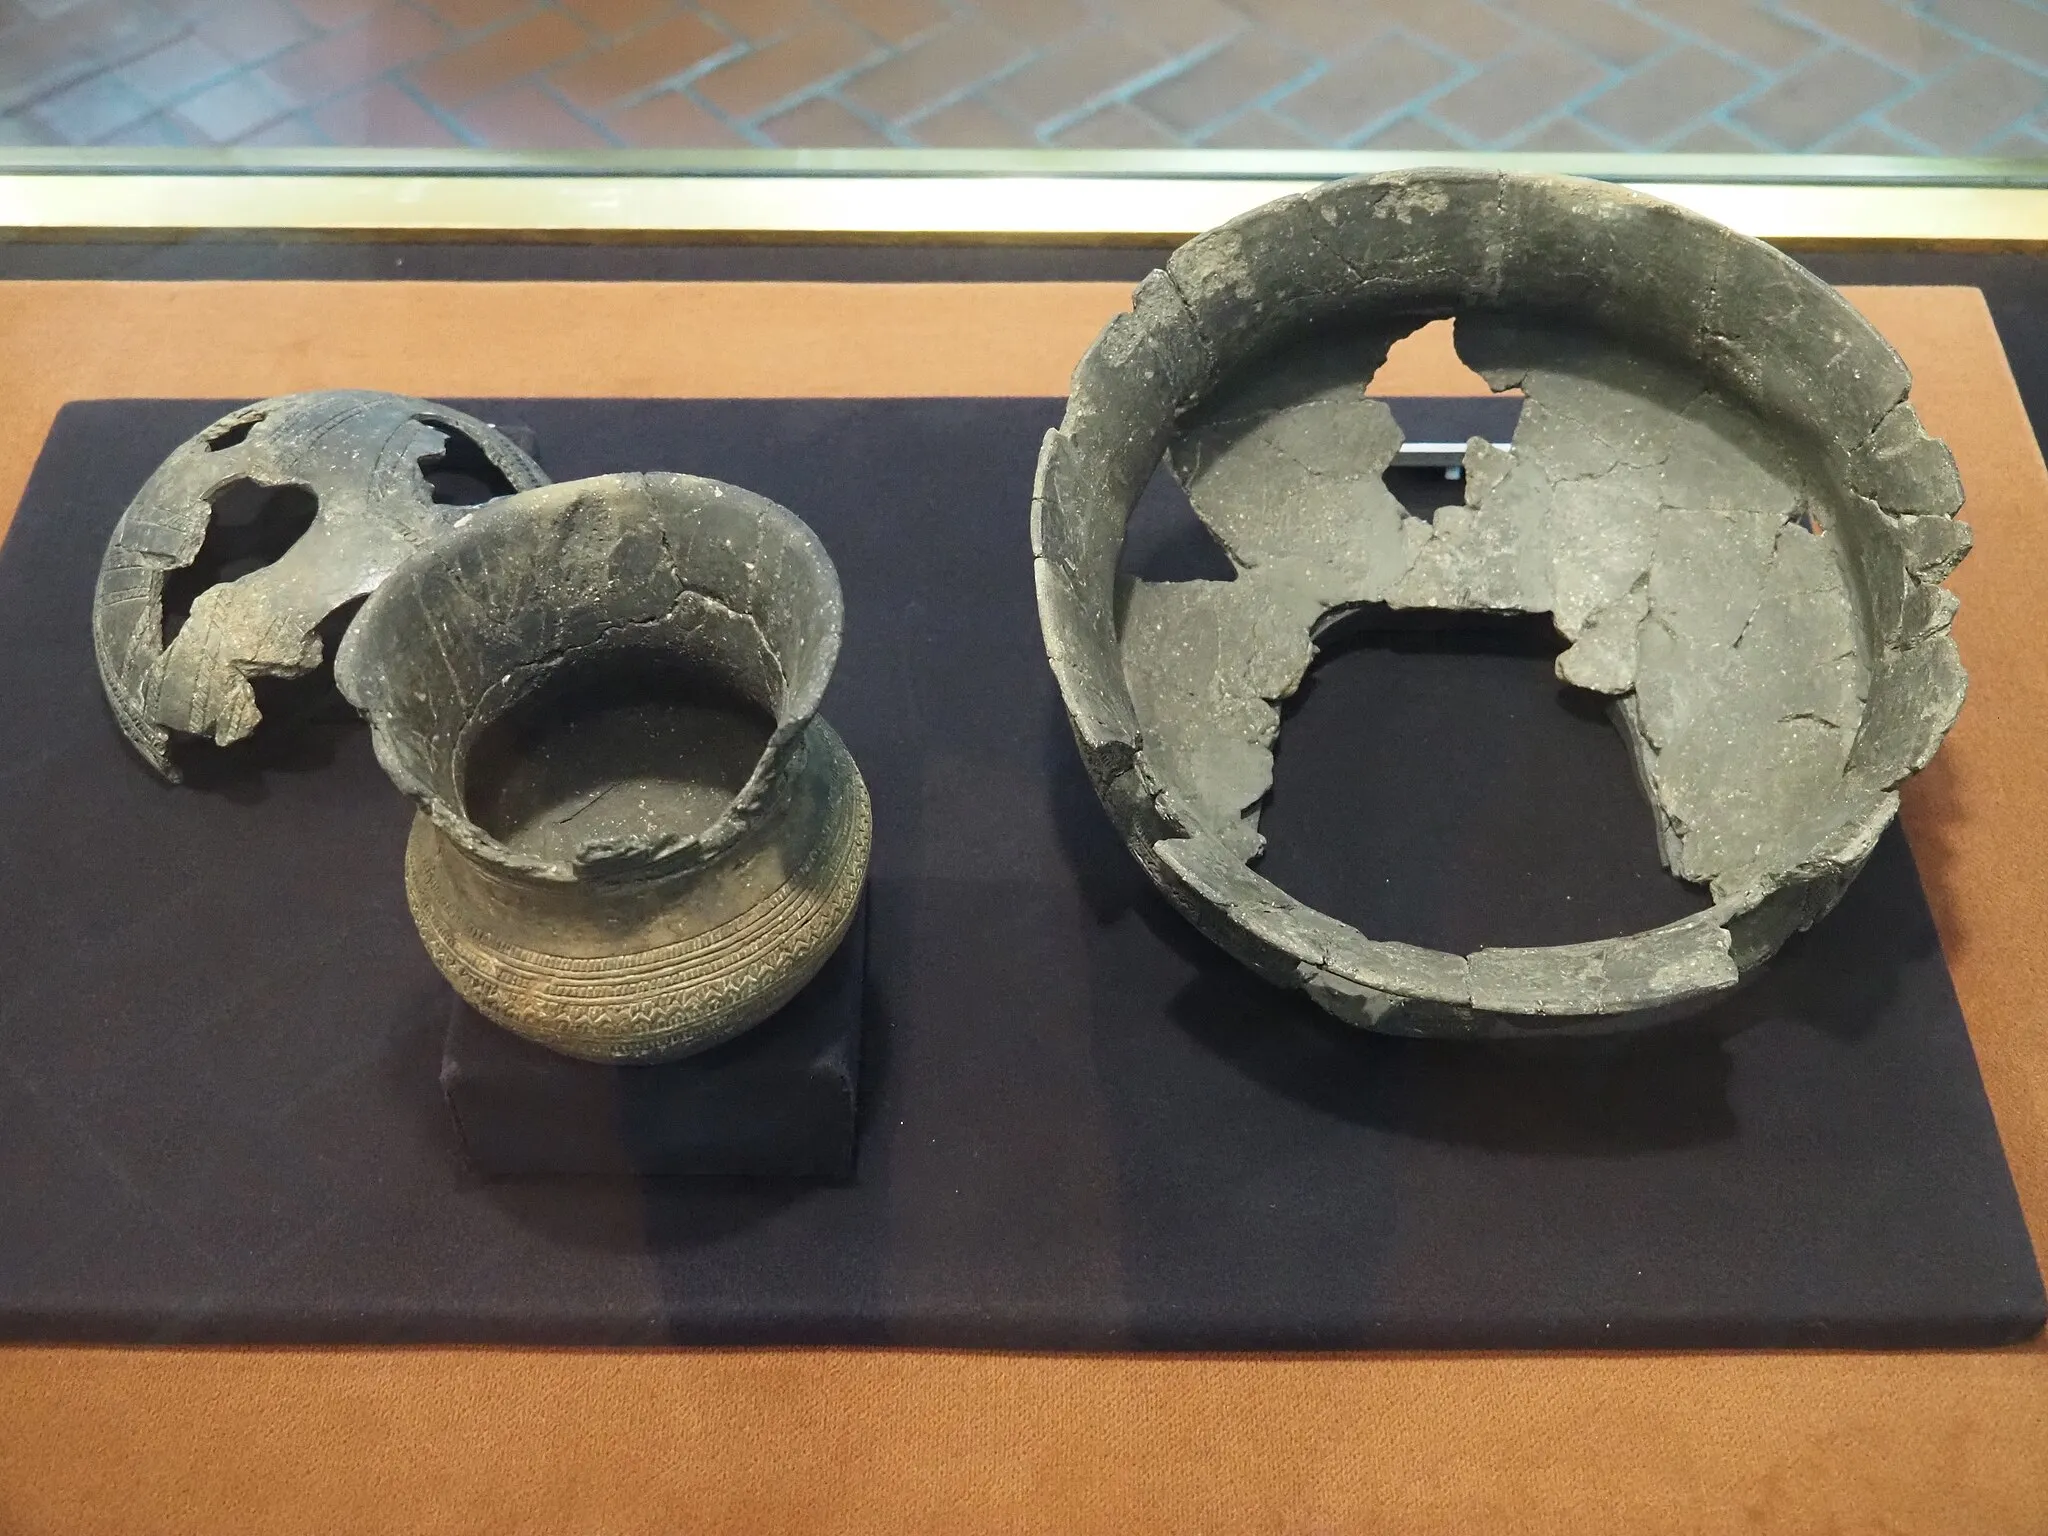 Photo showing: Three ceramic bowls (a Bell Beaker, a carinated casserole and a hemispherical bowl) from grave goods from a burial of the Bell Beaker culture found in Fuente-Olmedo (Valladolid) and dated around 2,000 BC. The set is preserved in the Museum of Valladolid.